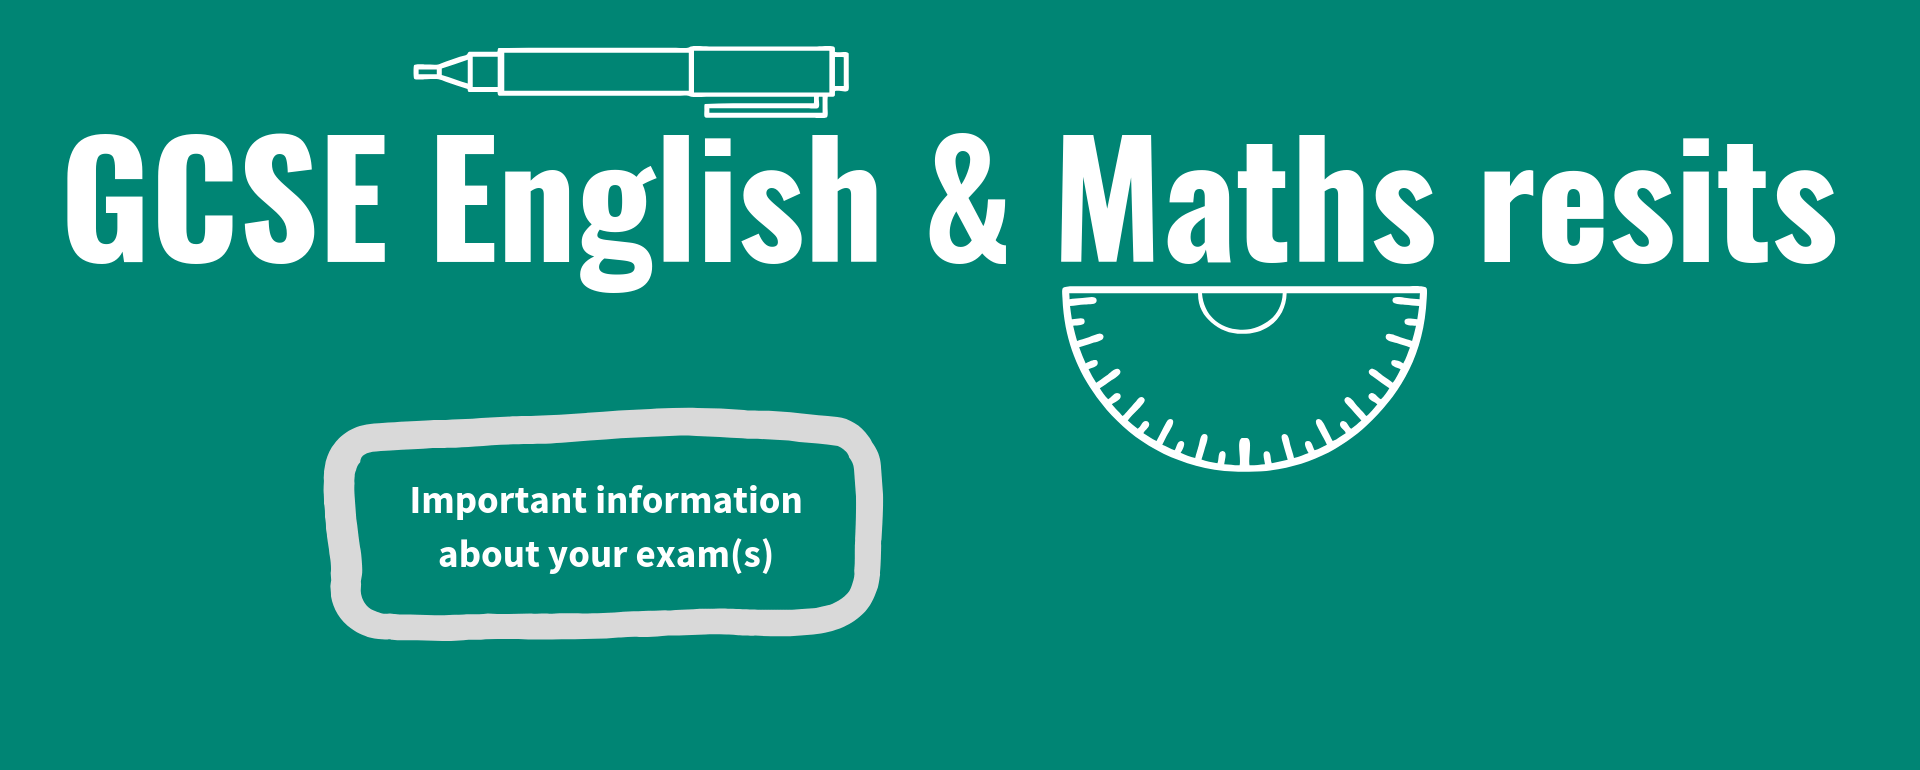 GCSE English and maths resits. Important information about your exams